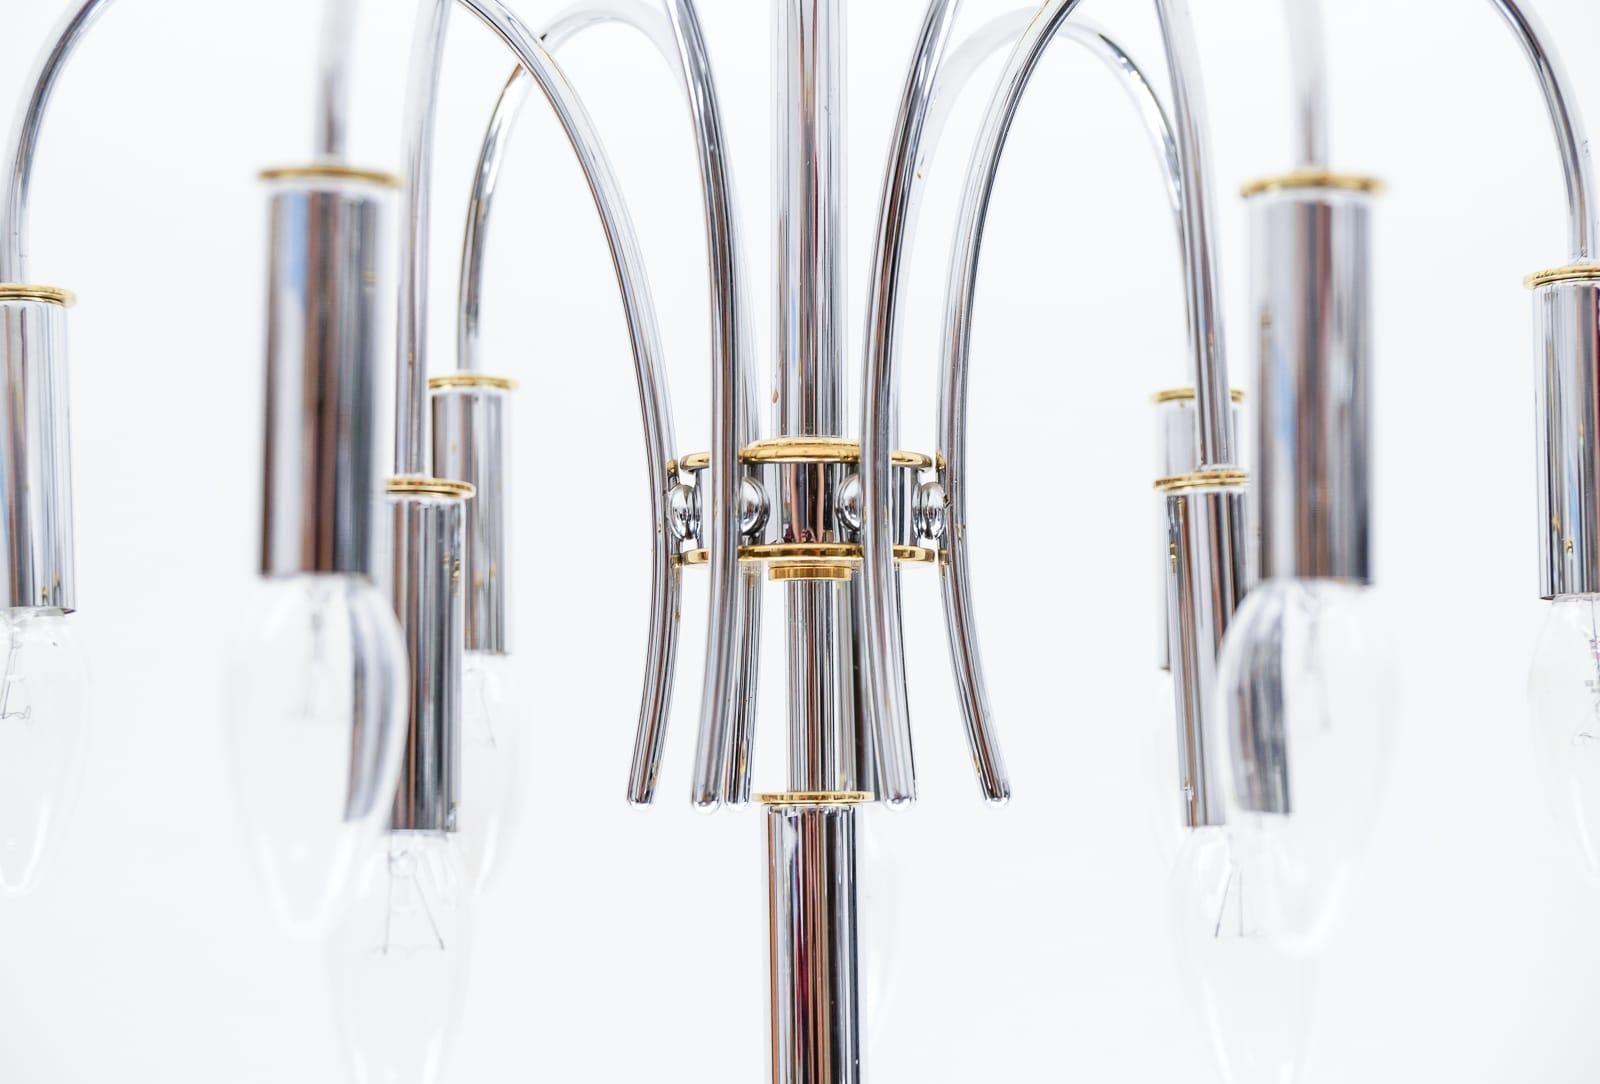 Mid-20th Century High Quality Chrome & Brass Ceiling Lamp by Schröder & Co., 1960s Germany For Sale